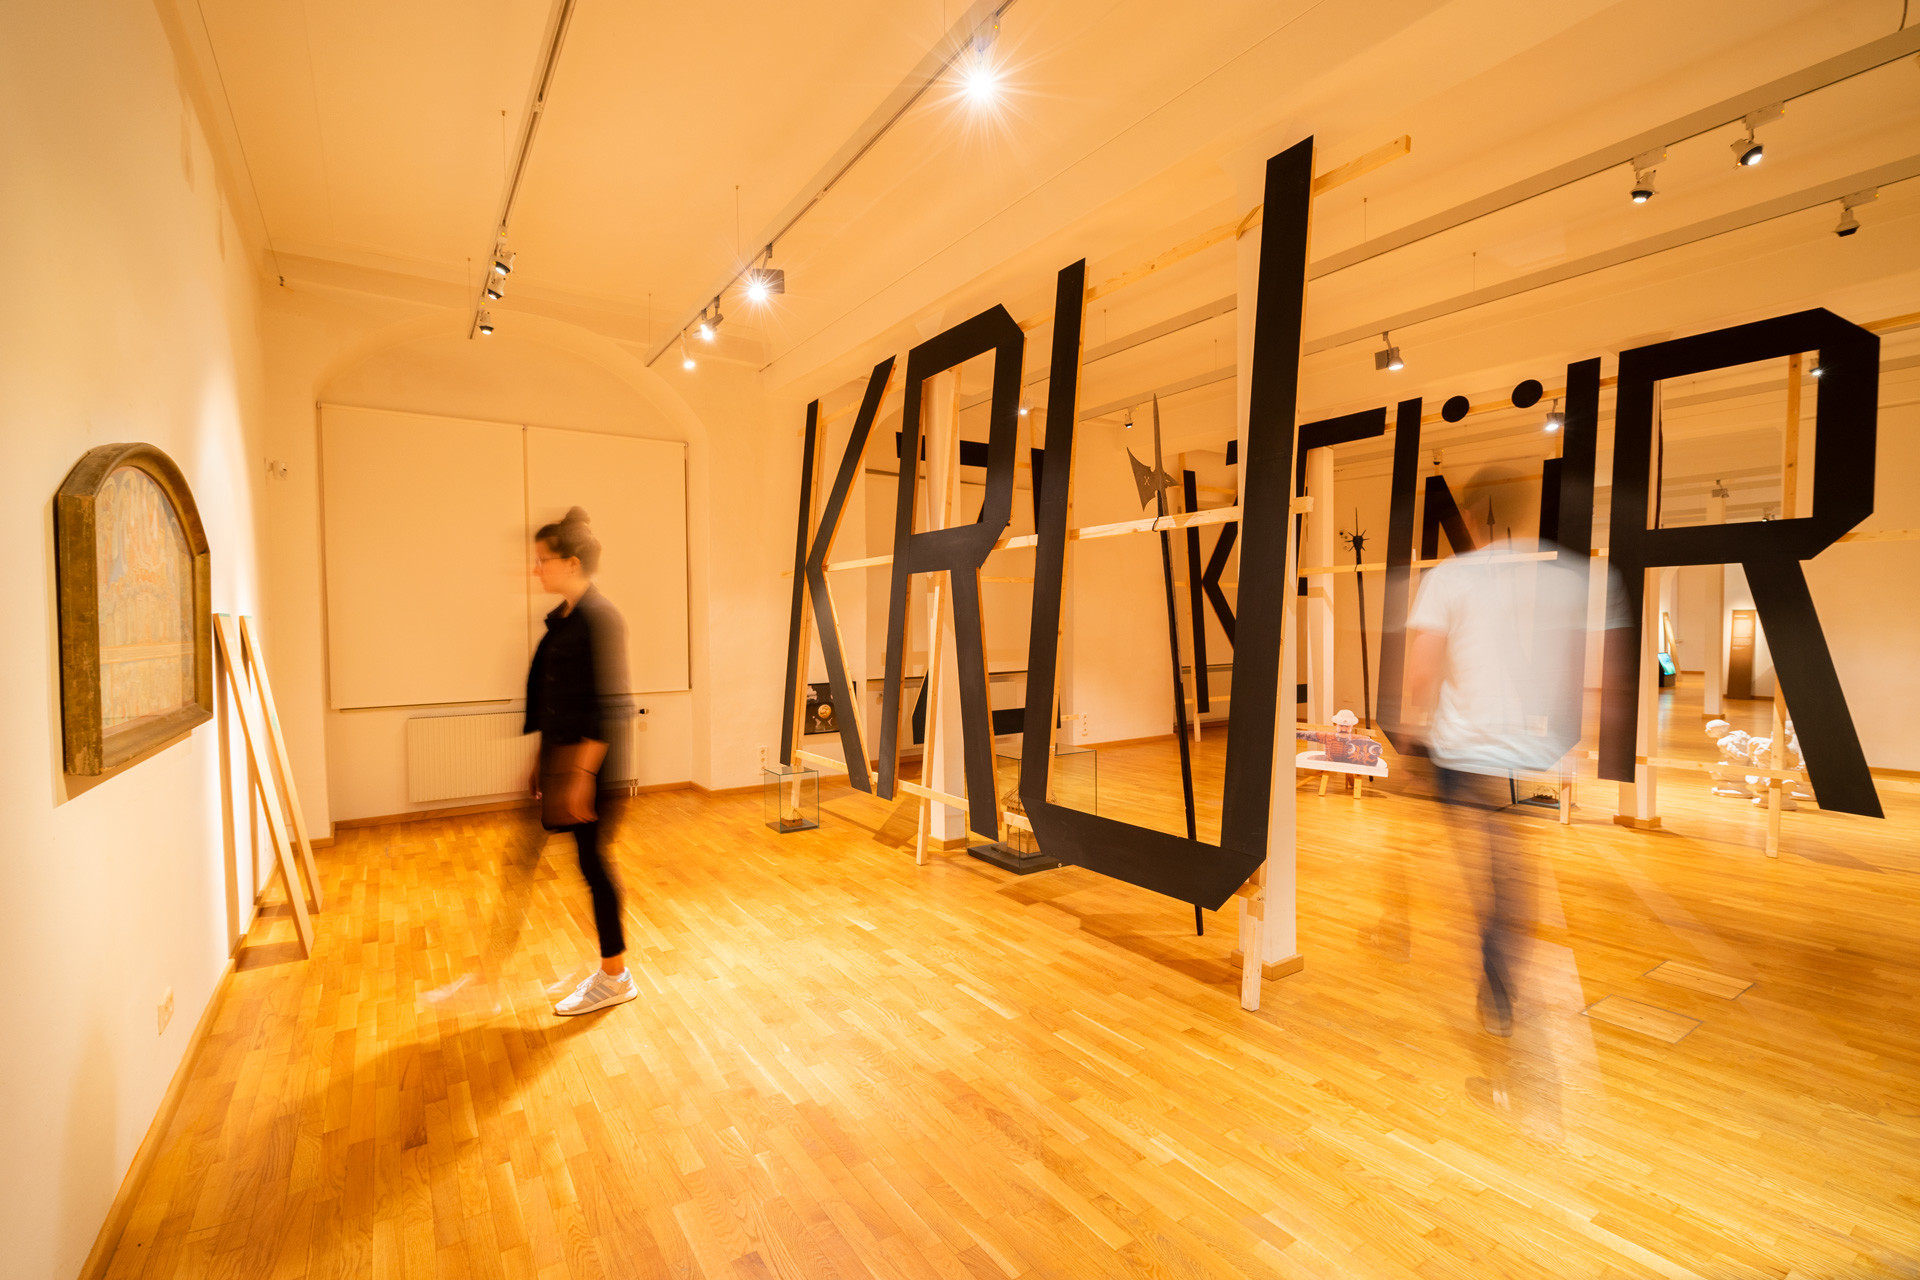 Exhibition space with an expansive typographic installation through which people walk